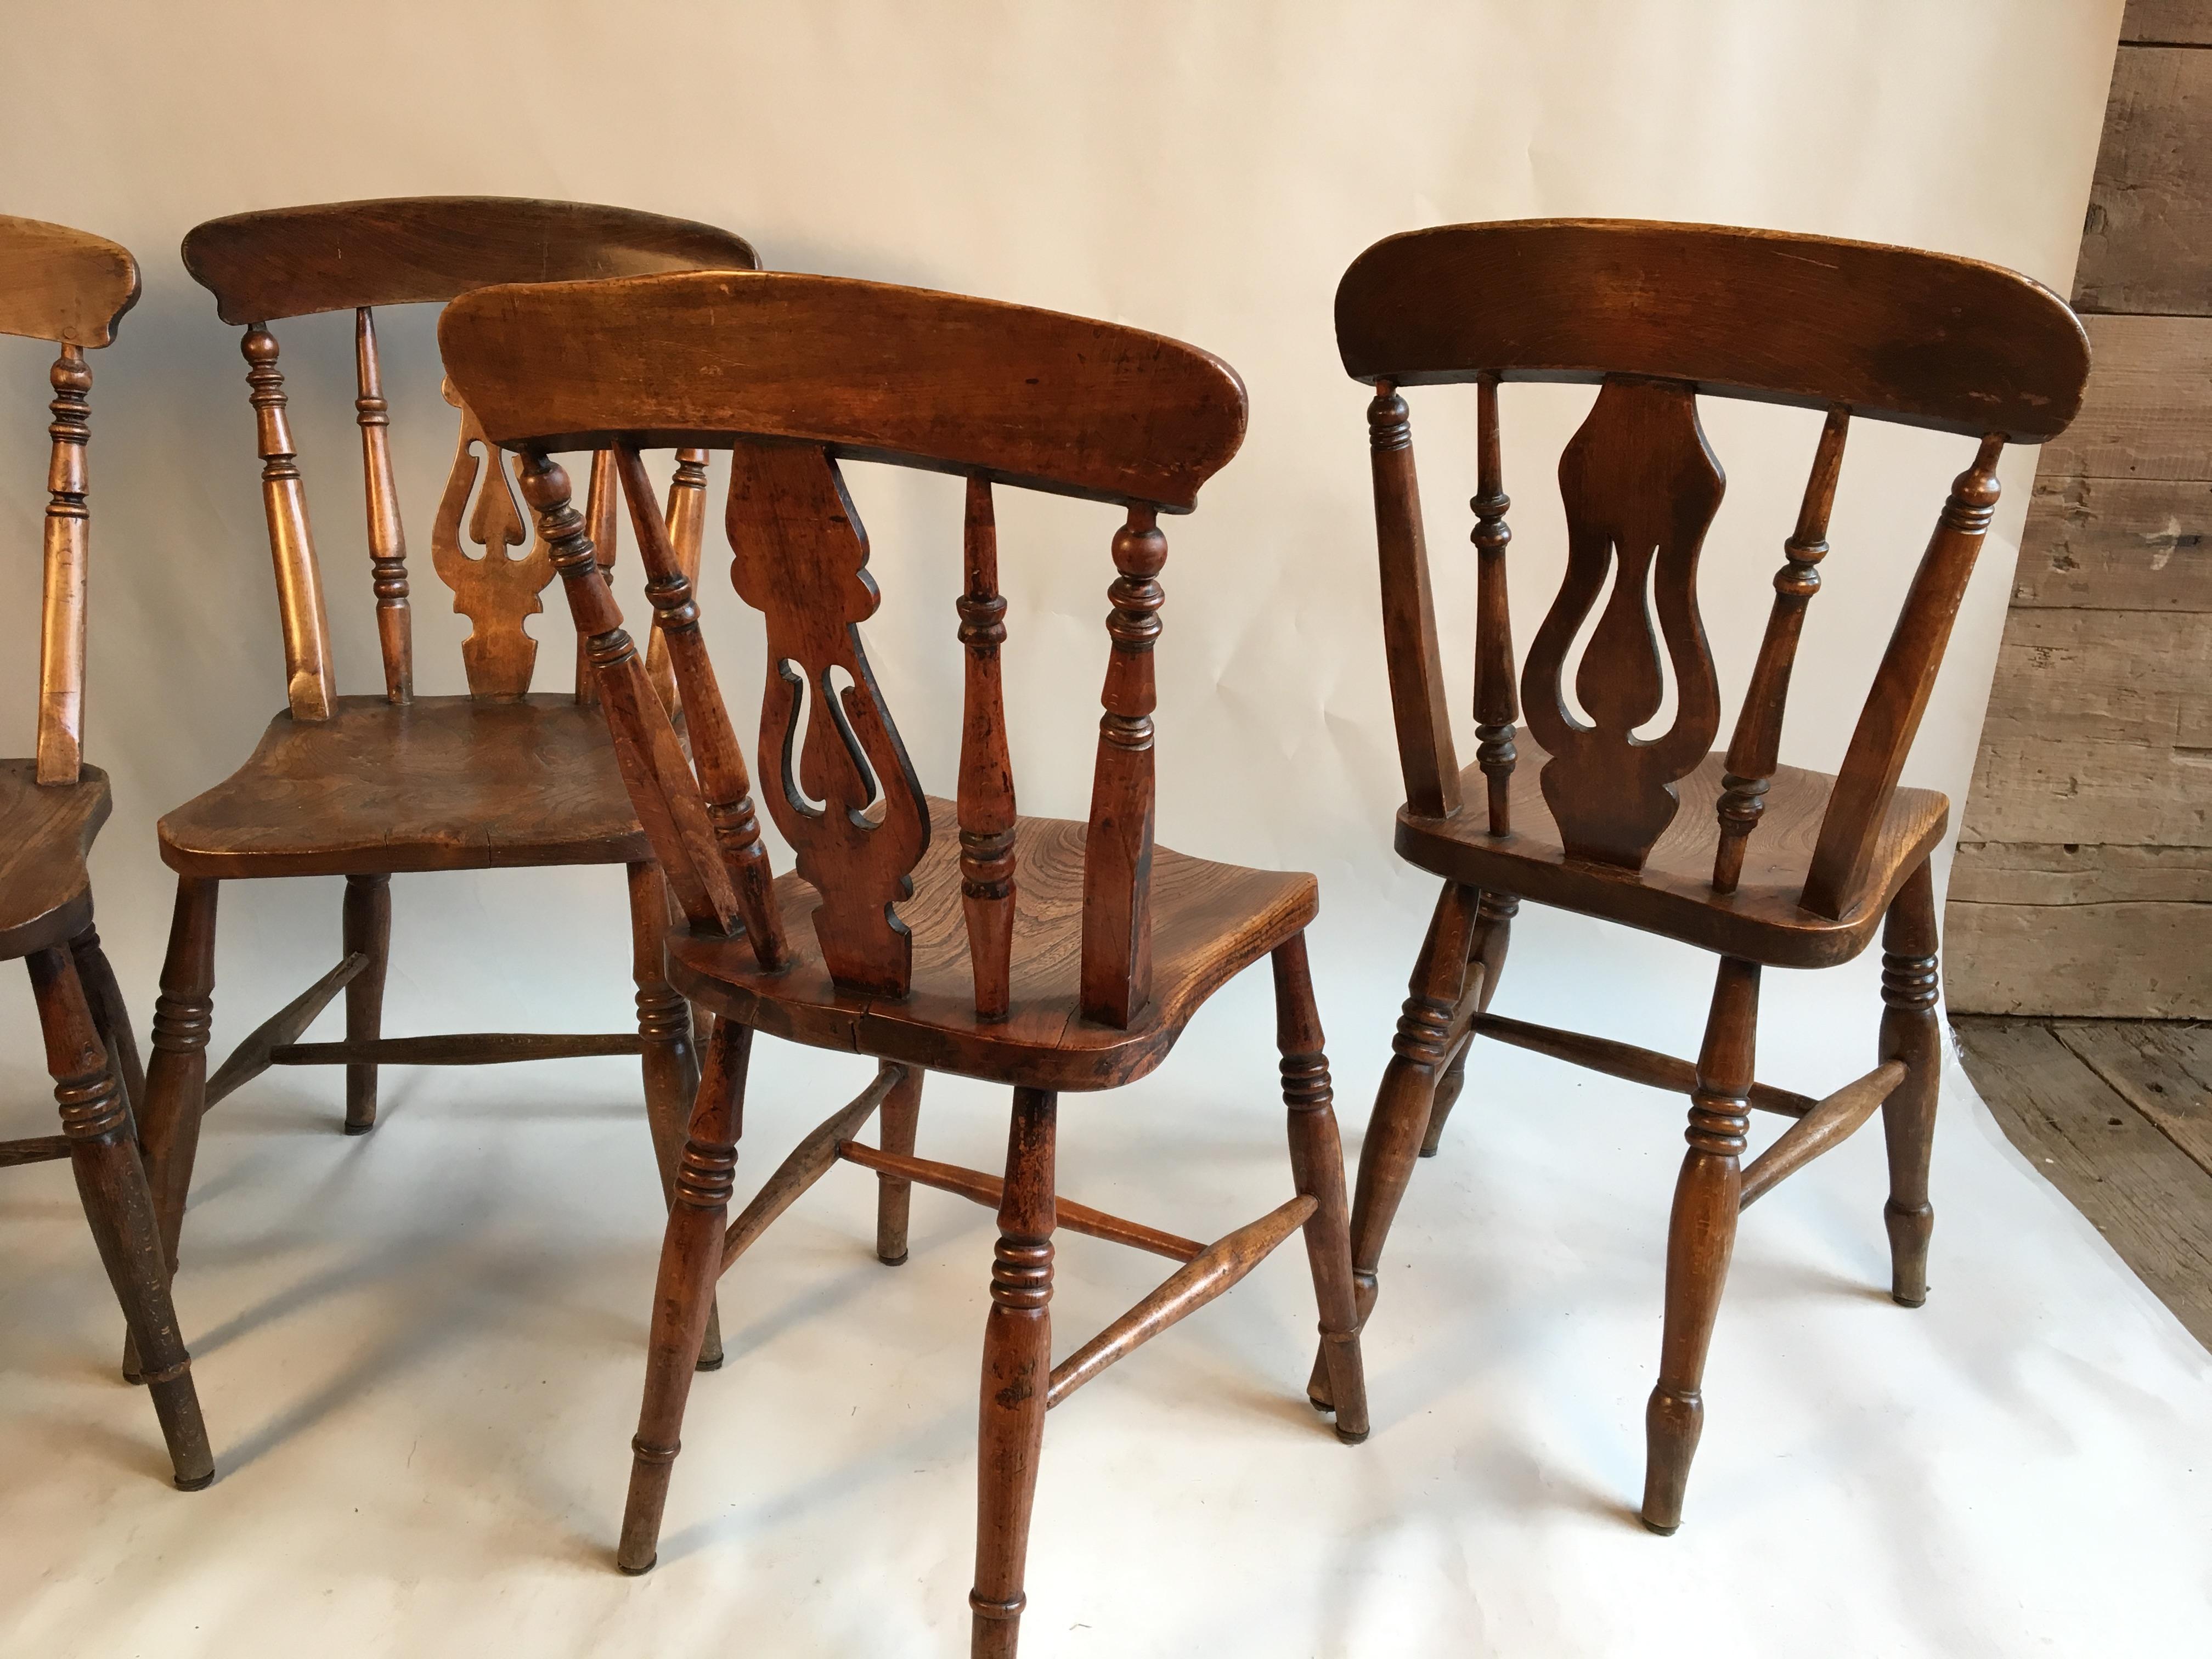 Set of 4 English Country Chairs, 19th Century 1